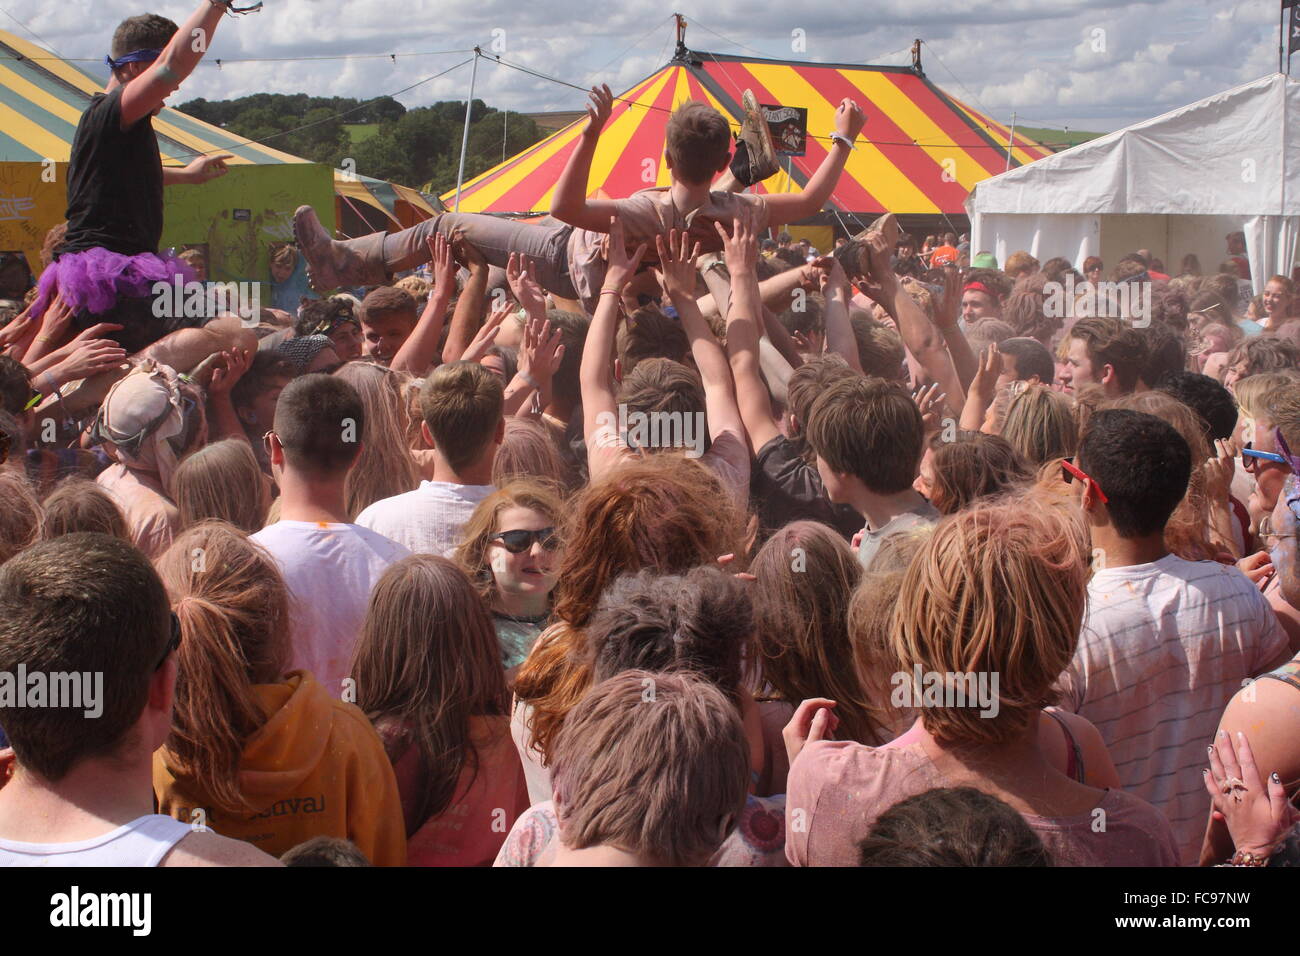 A festival goer is carried above a crowd during a powder paint fight at the Y Not music festival, Derbyshire UK - summer Stock Photo